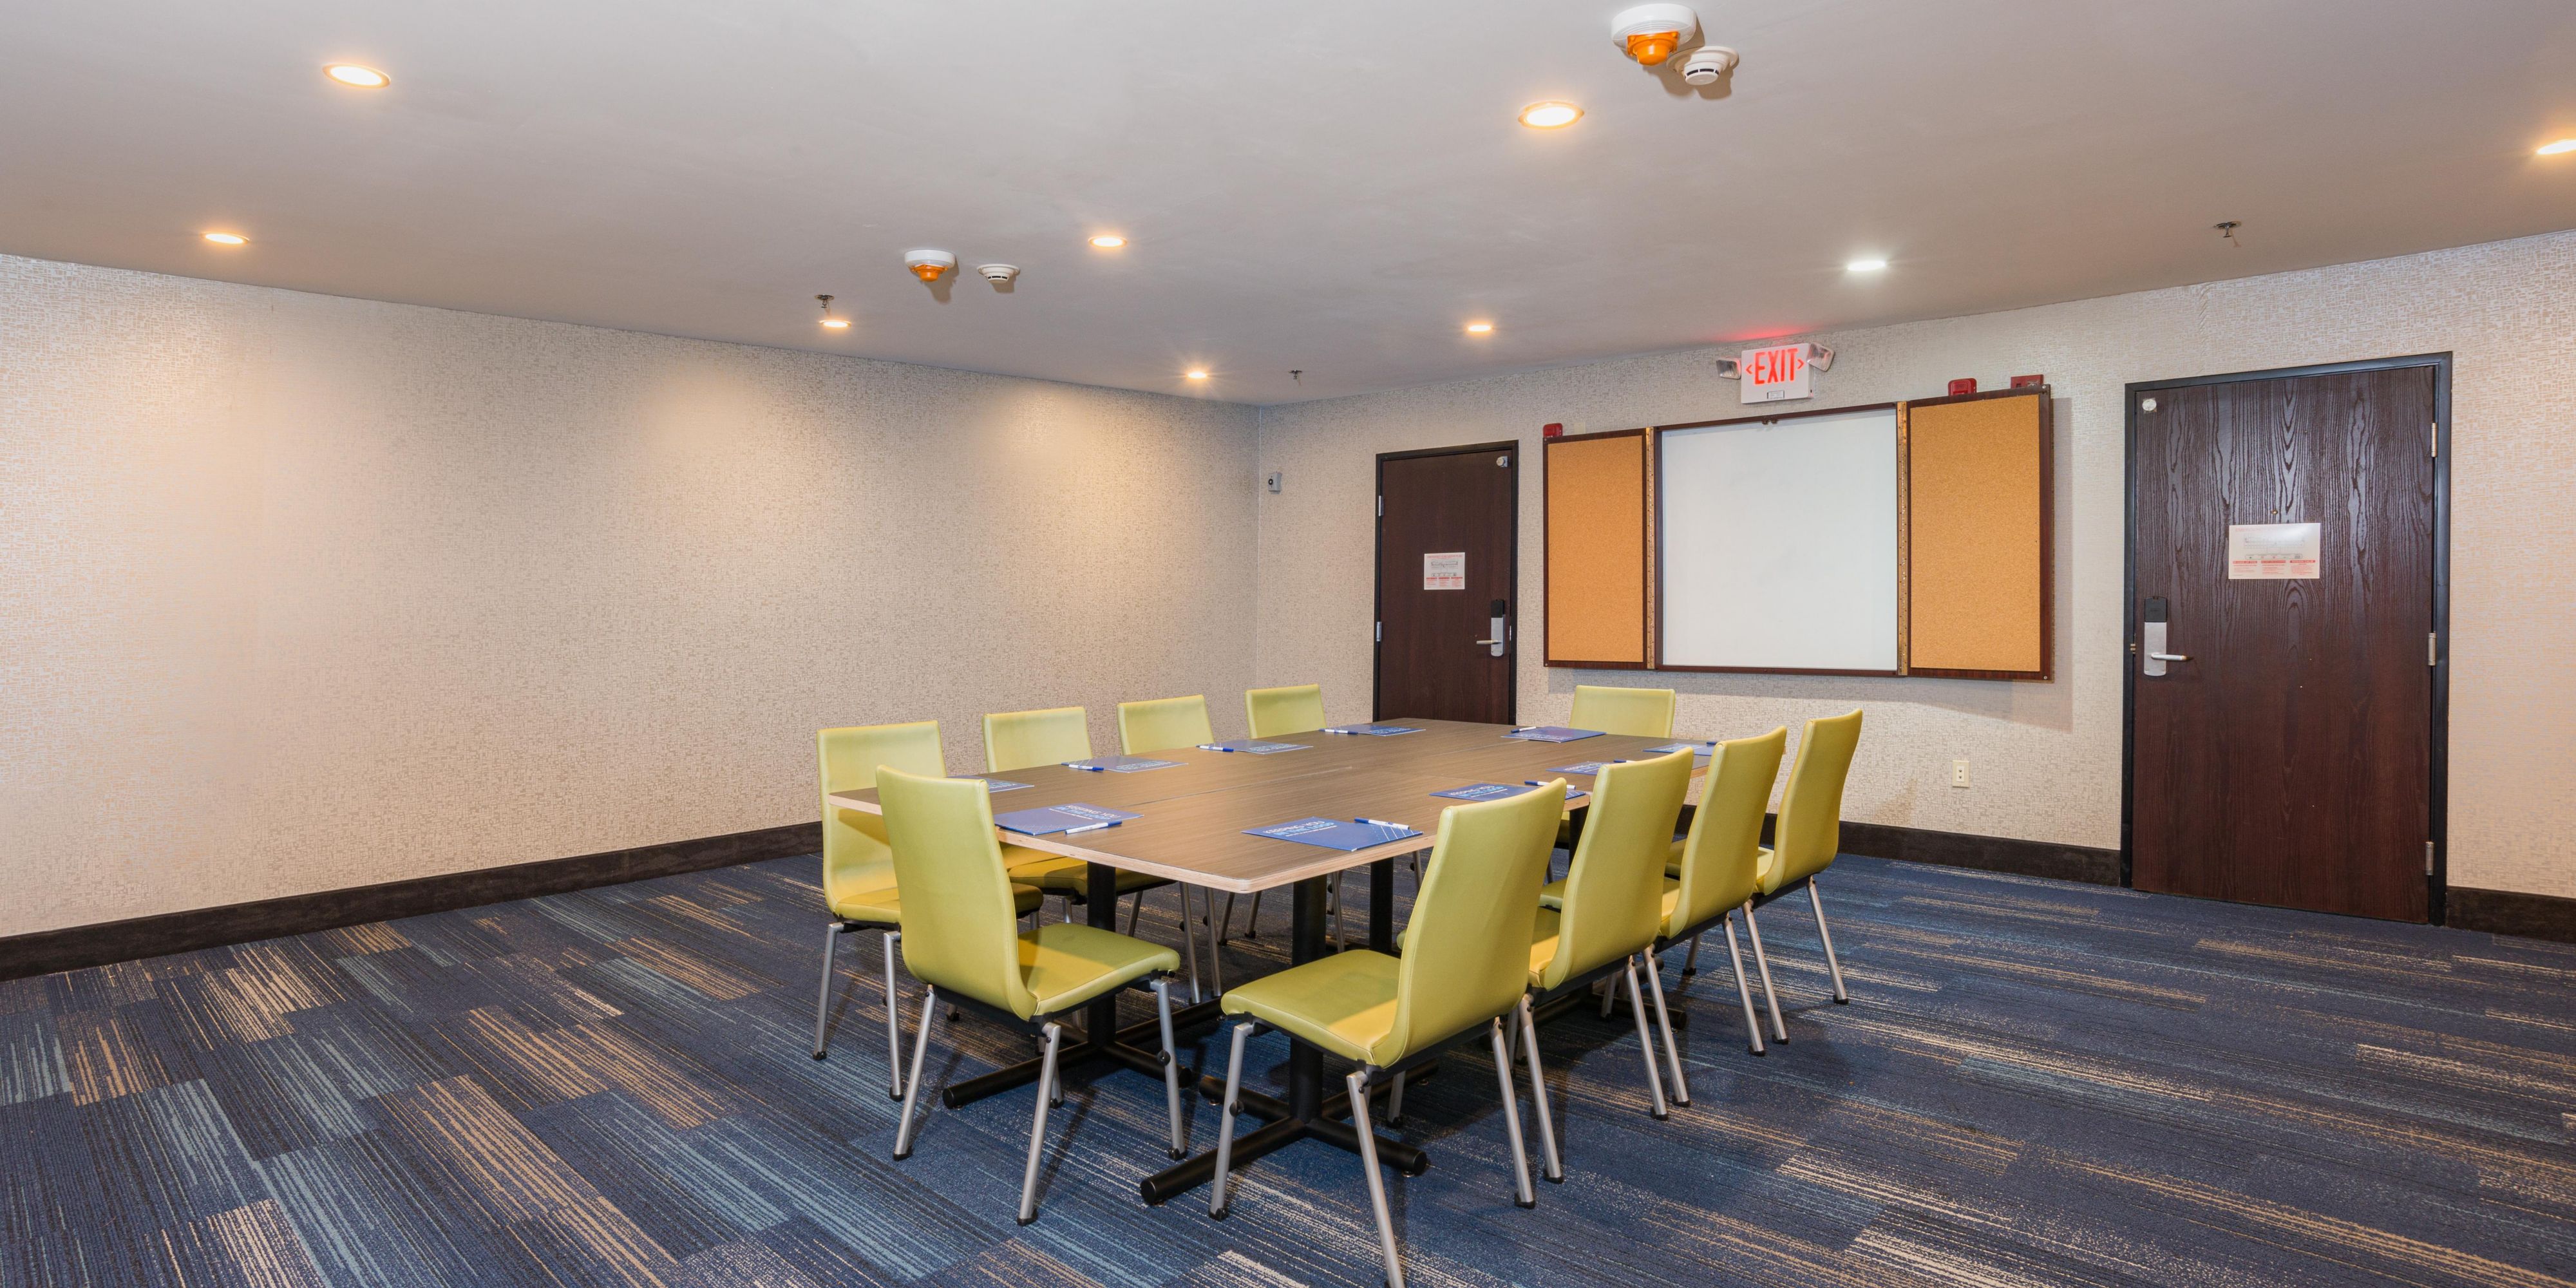 The Bristol room offers flexible meeting space and is great for a family social affair for up to 25 people seated. Included in your meeting room rental we provide complimentary Wi-Fi, tables and chairs. Contact us today to book. 